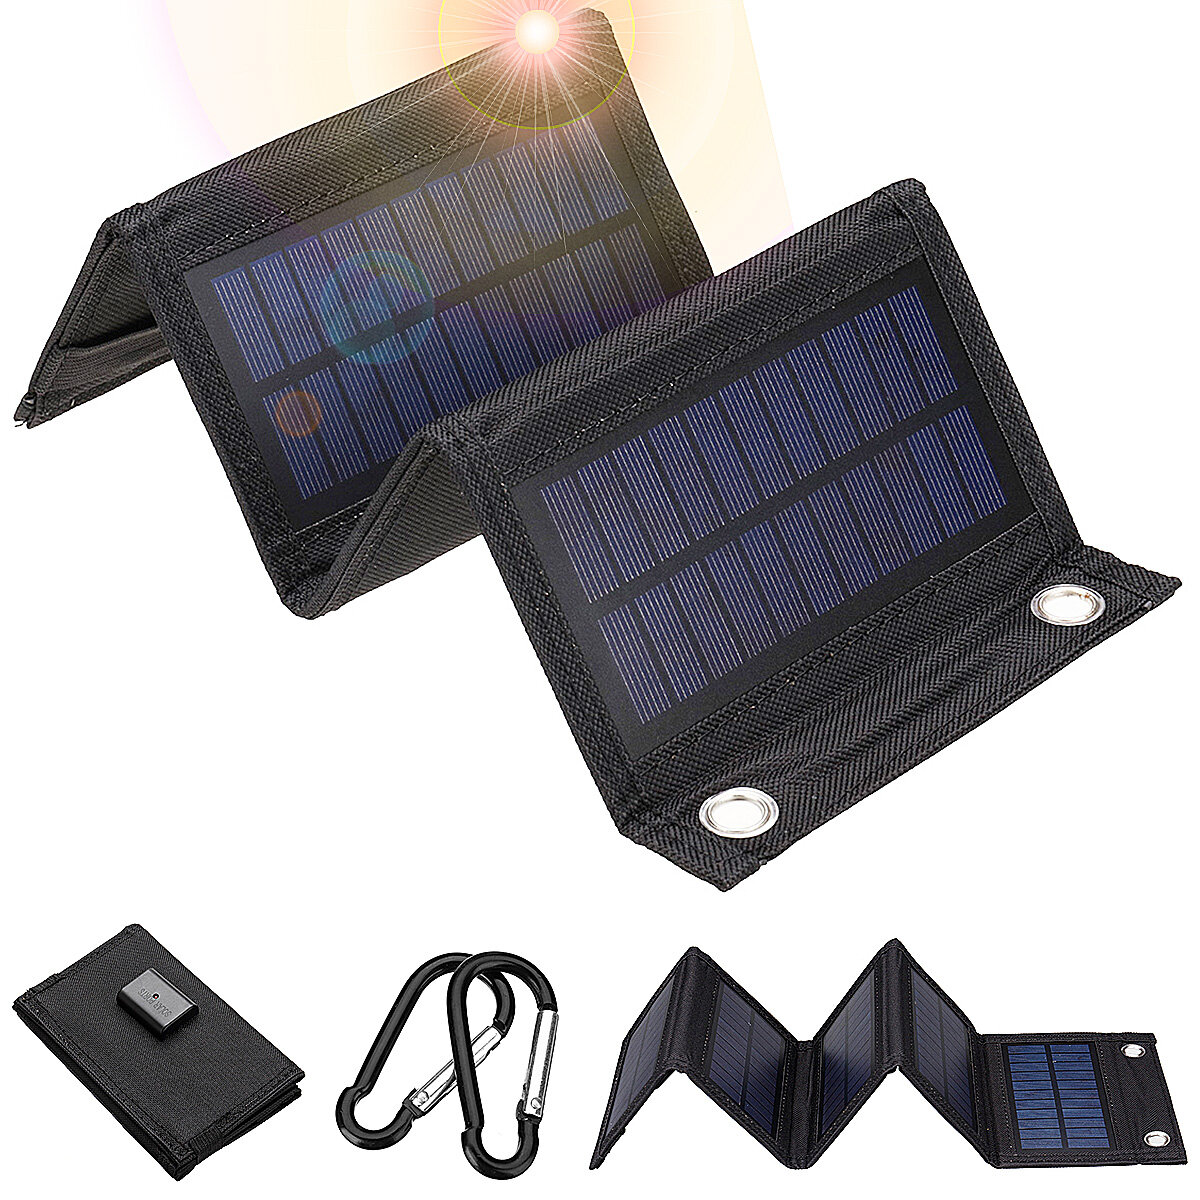 10w/7.5w/6w Foldable Solar Panel Solar Cells Charger 5V USB Protable Solar Mobile Power For Smartphone Camping Outdoor